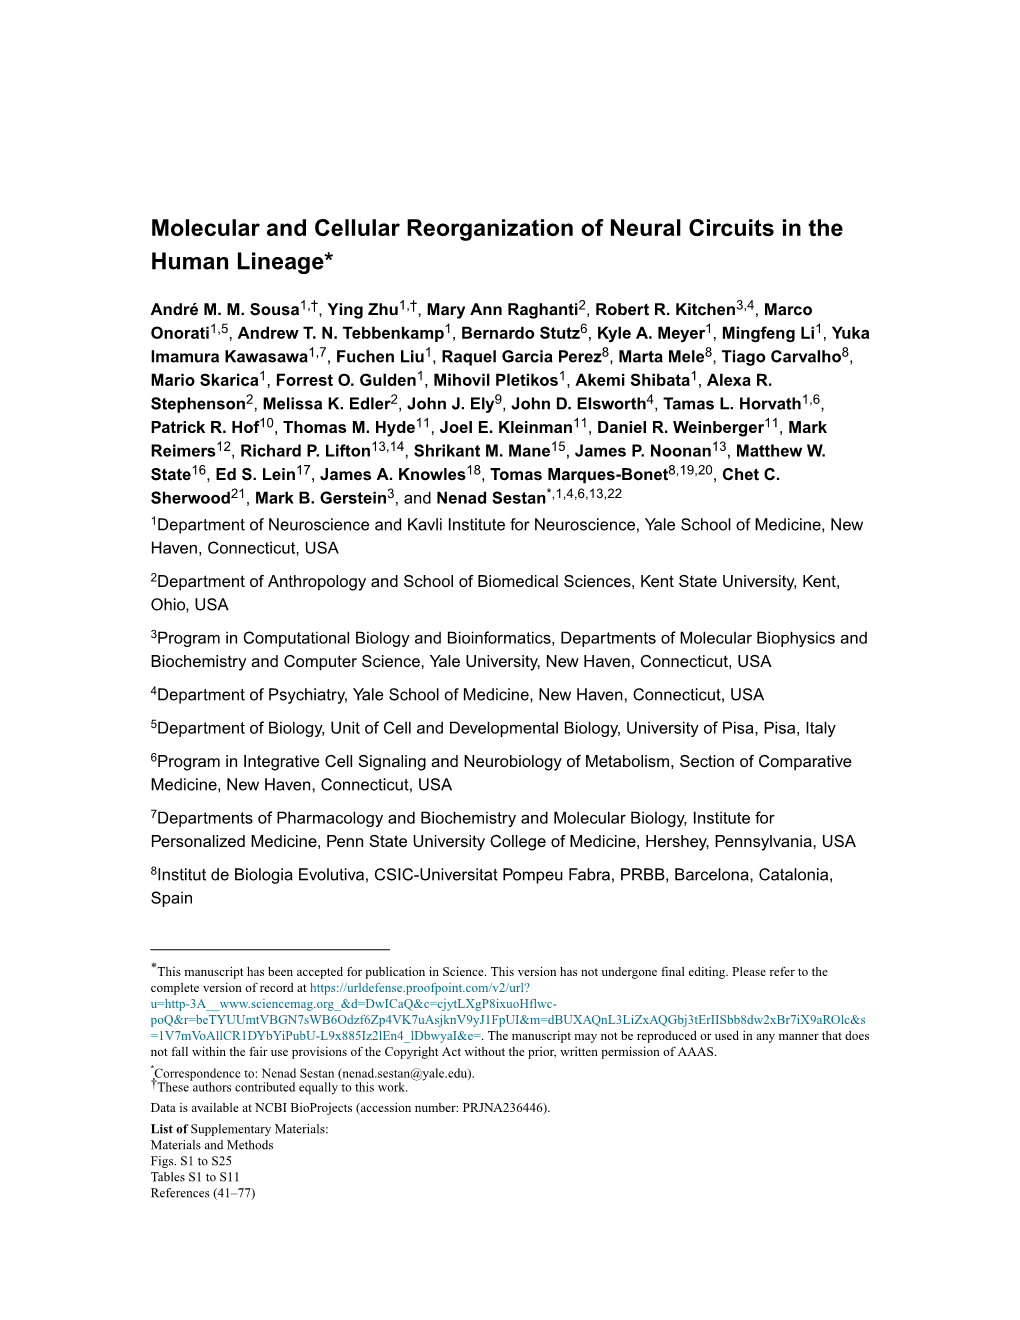 Molecular and Cellular Reorganization of Neural Circuits in the Human Lineage*